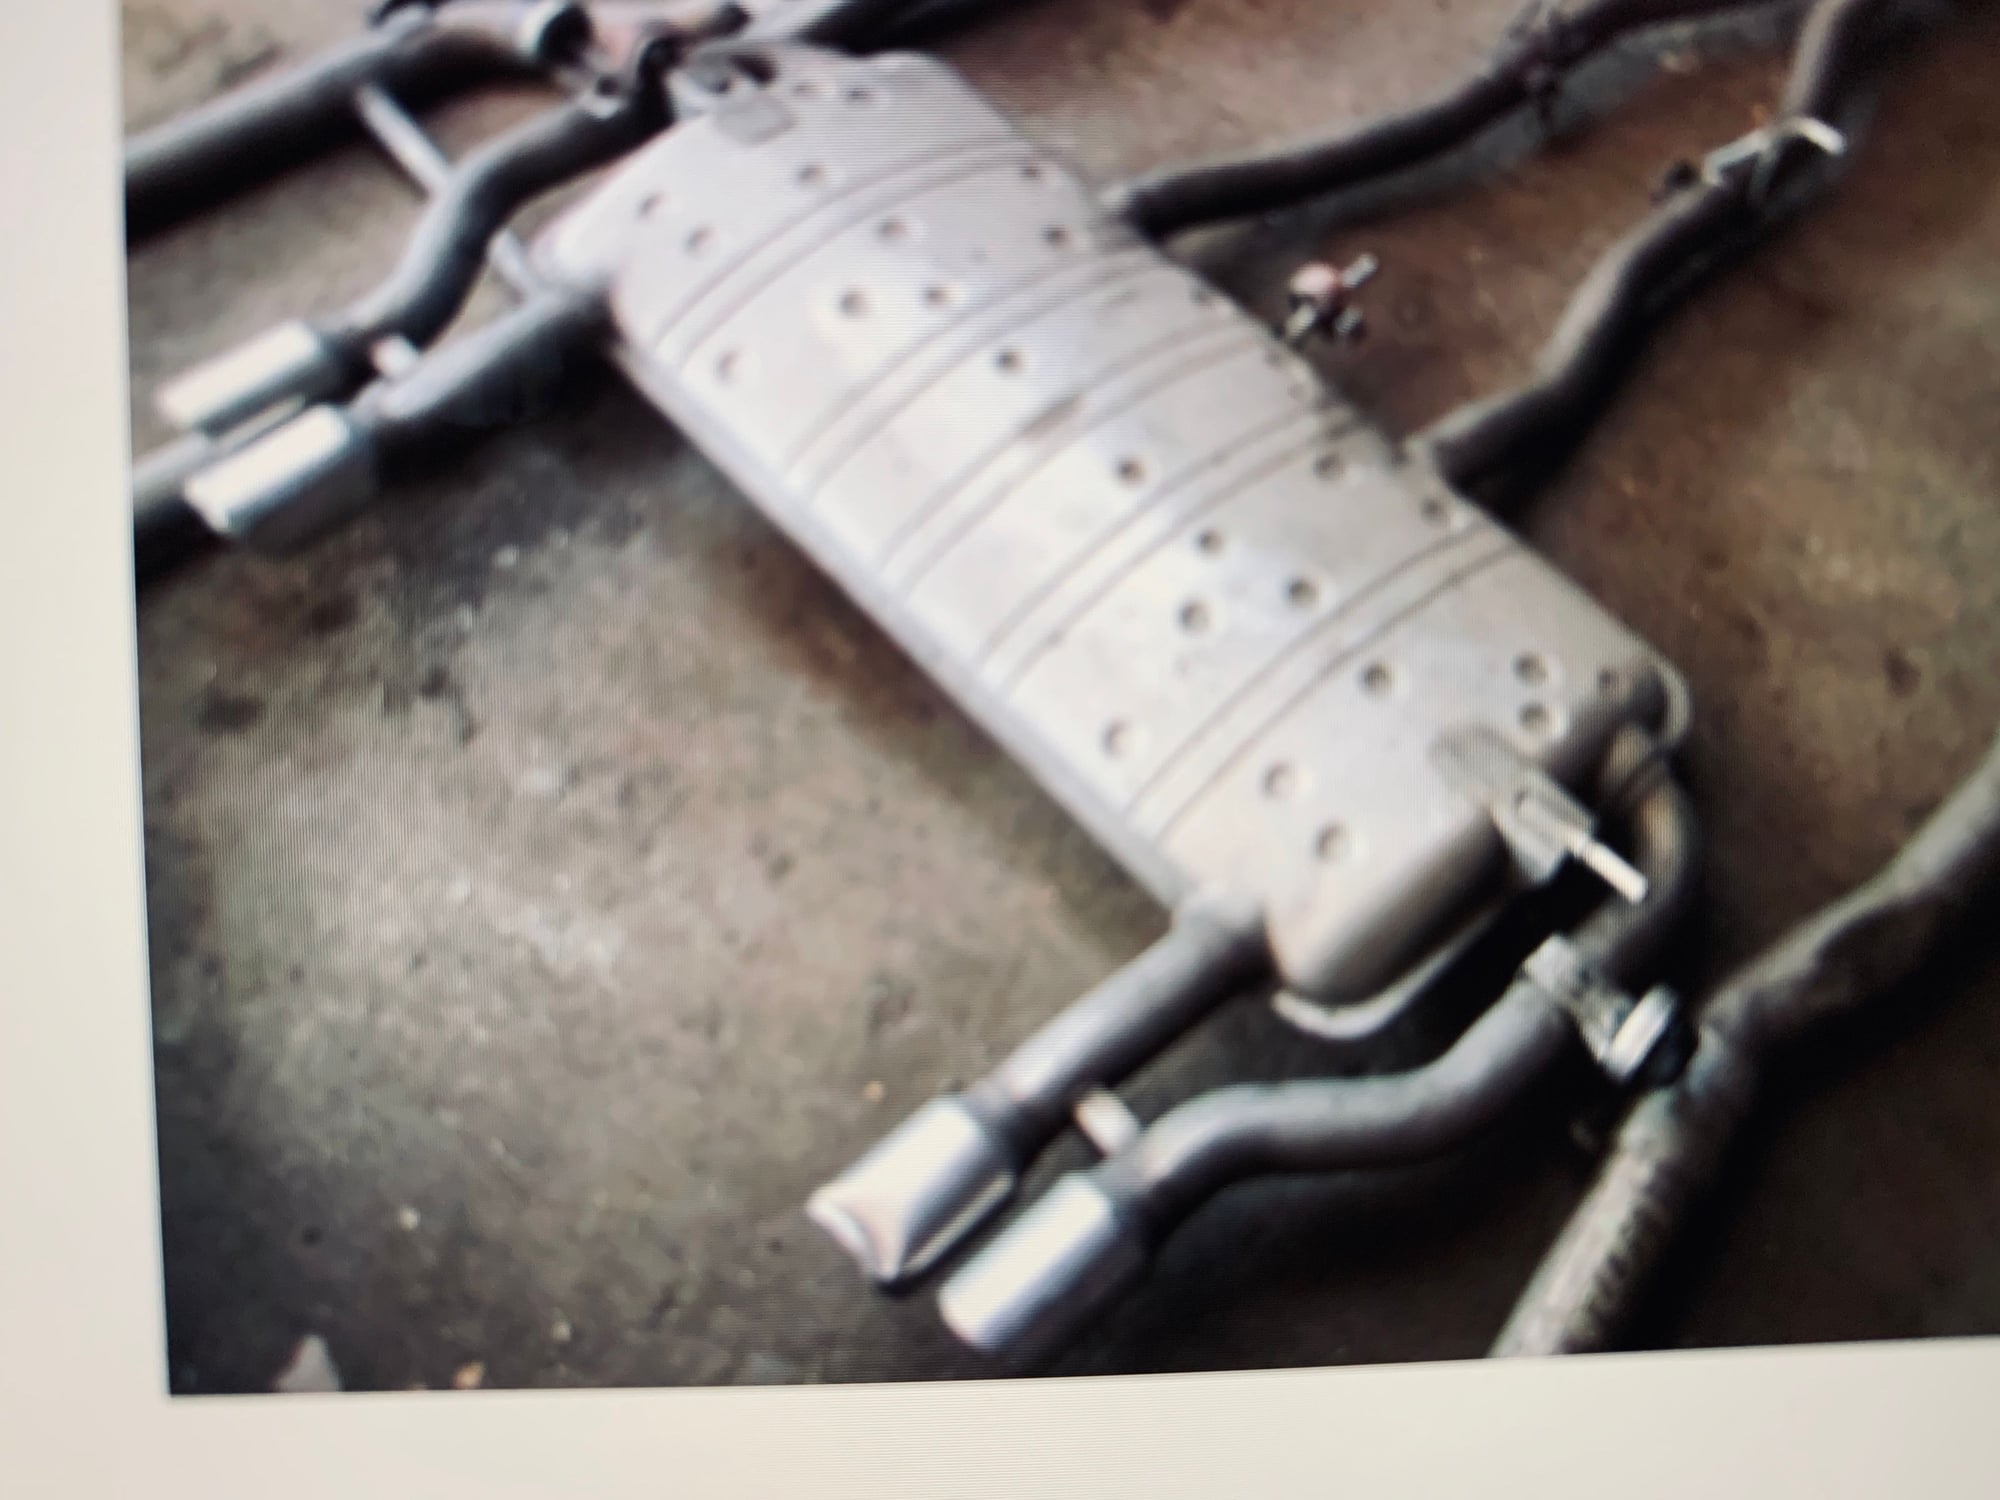 Engine - Exhaust - WTB; XKR rear exhaust box - Used - 2007 to 2009 Jaguar XKR - Newport Beach, CA 92660, United States